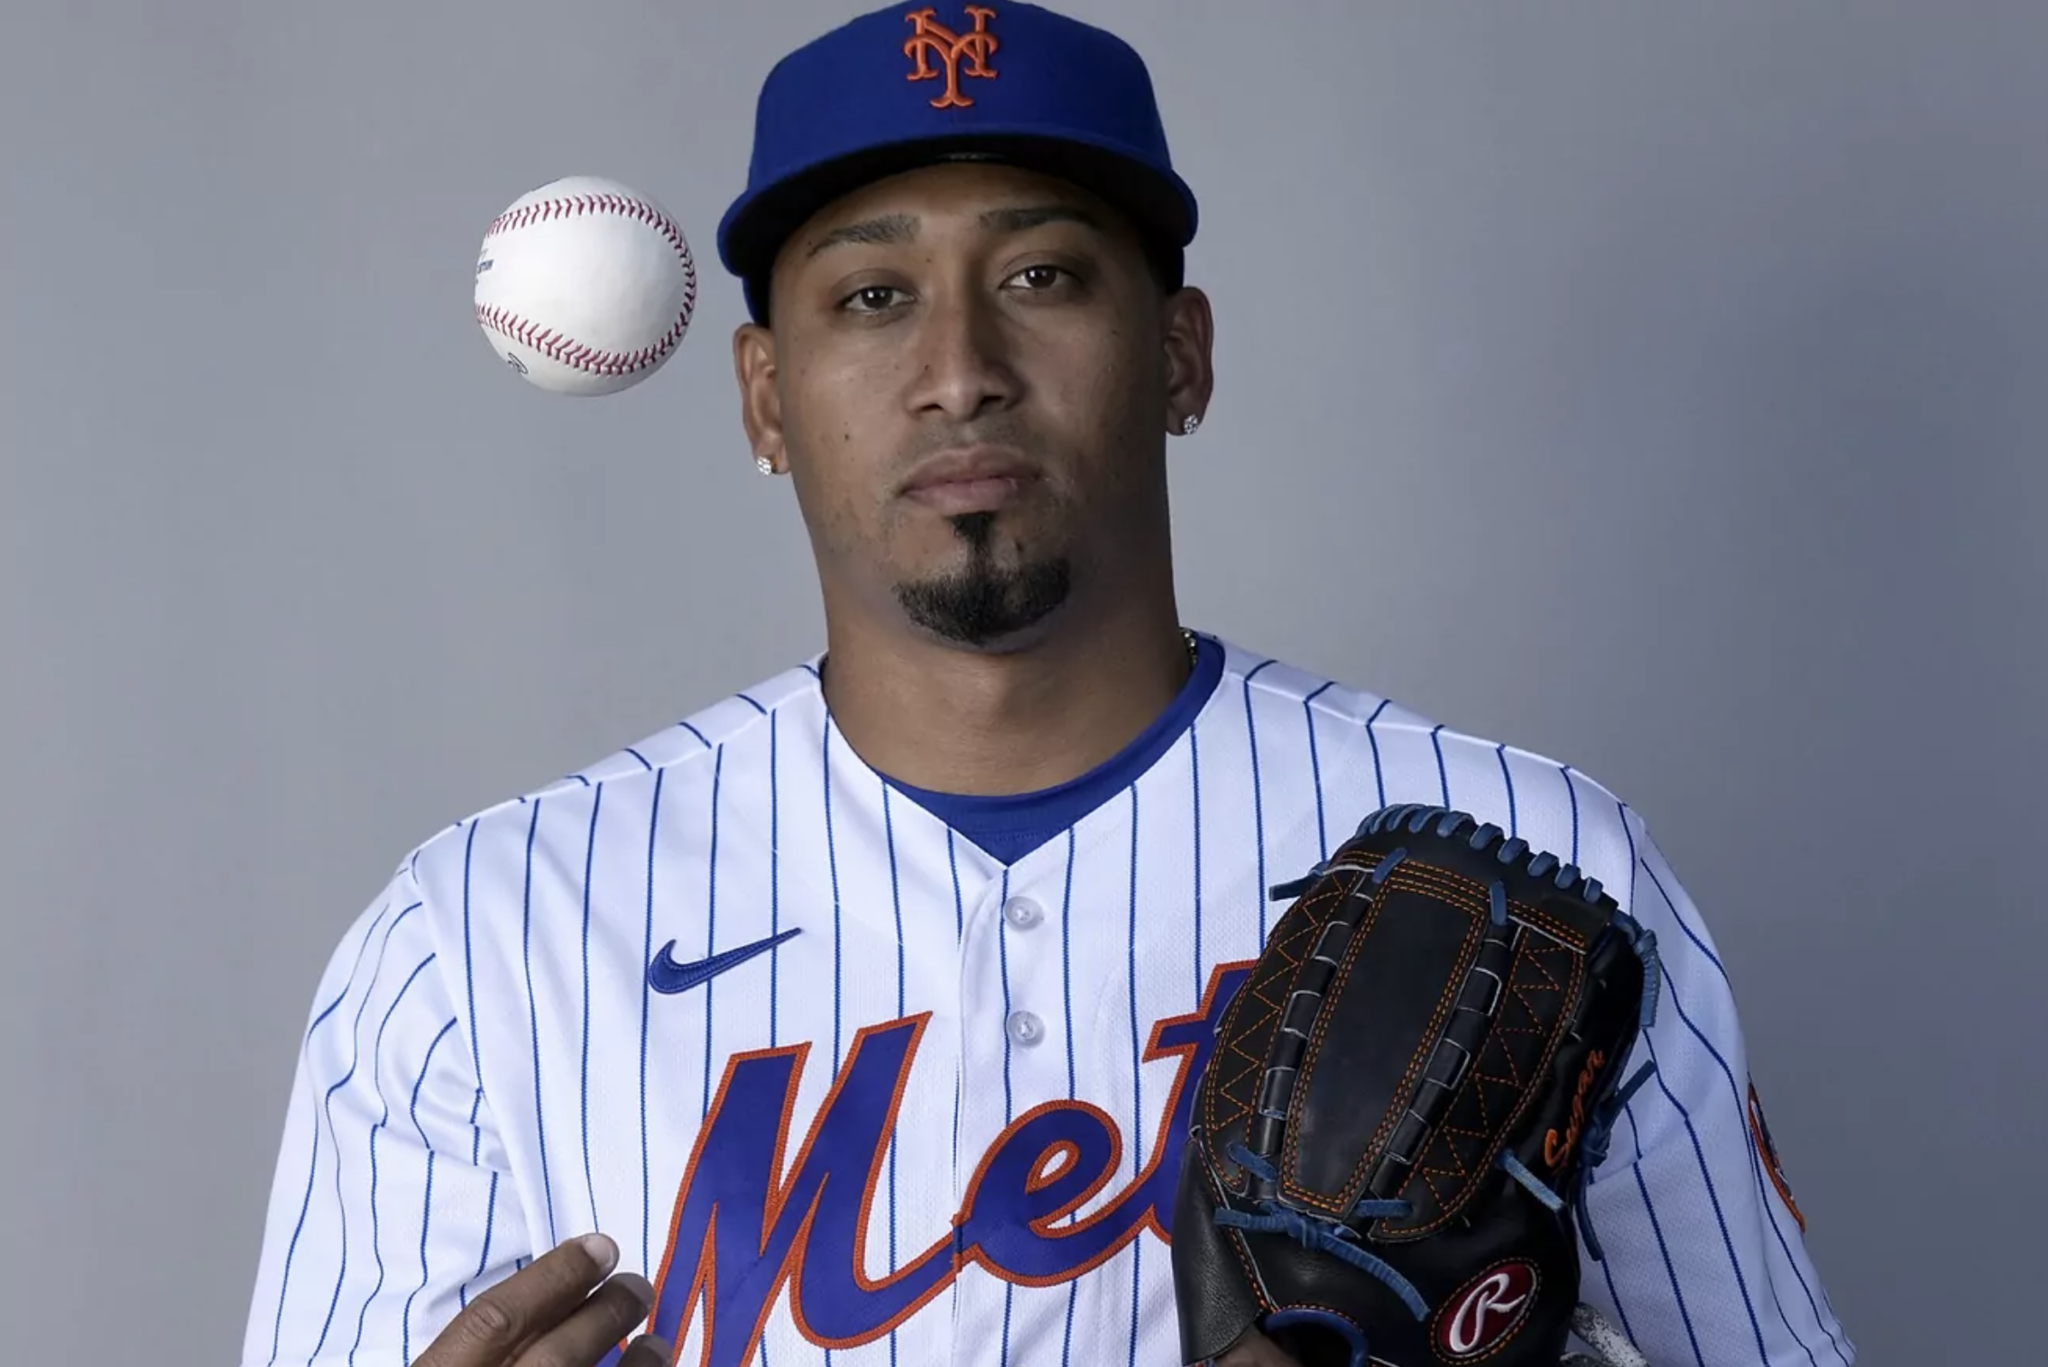 The New York Mets need cover for Edwin Diaz and could look to his brother Alexis Diaz